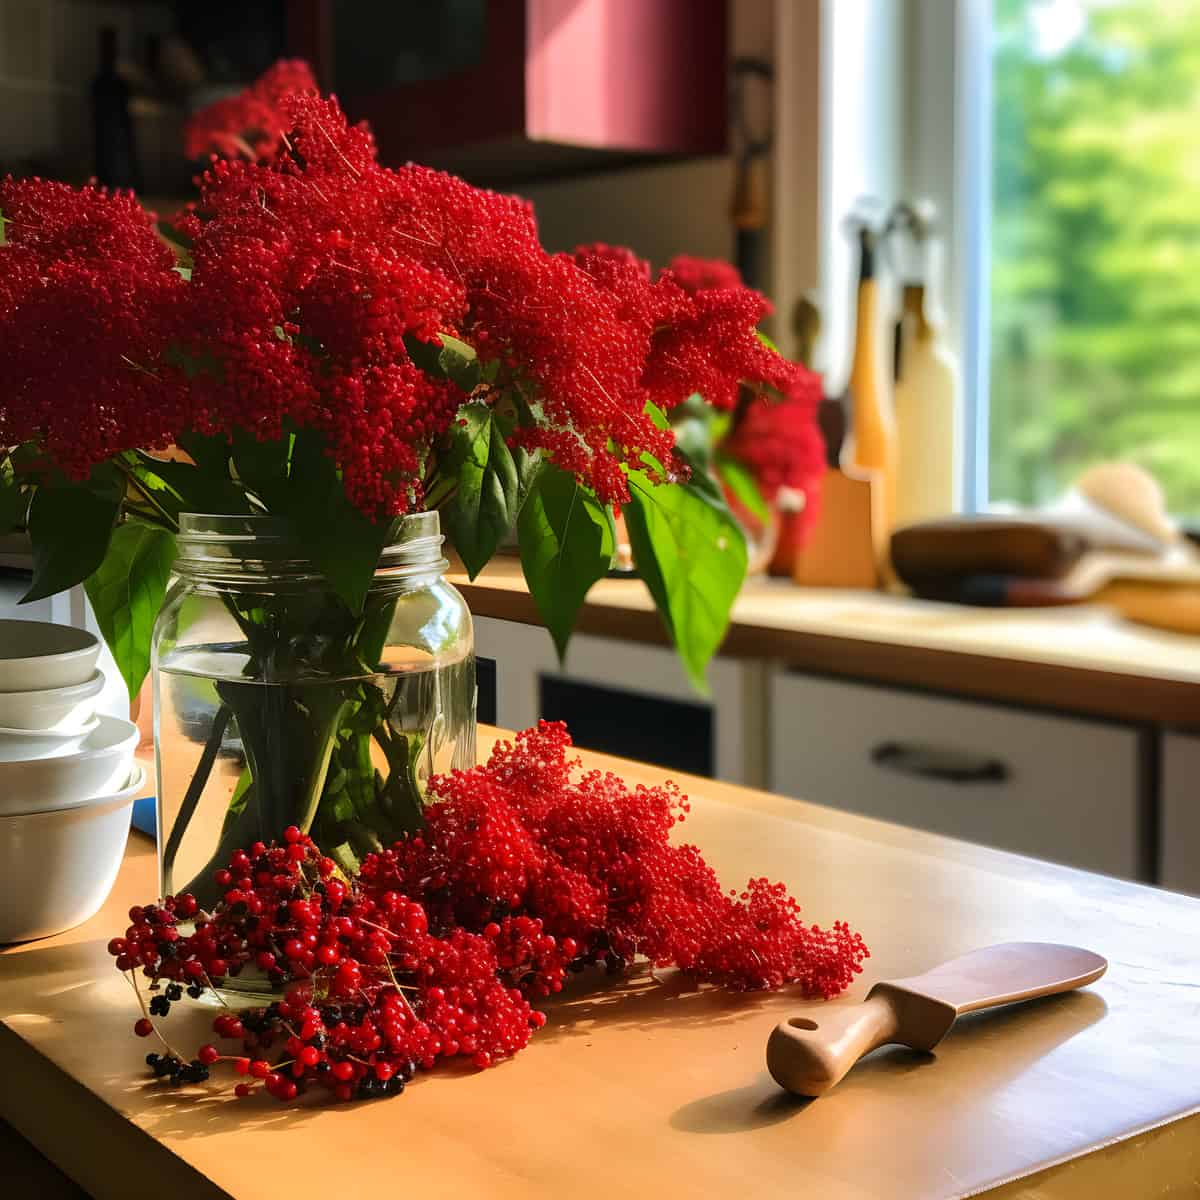 American Red Elderberries on a kitchen counter